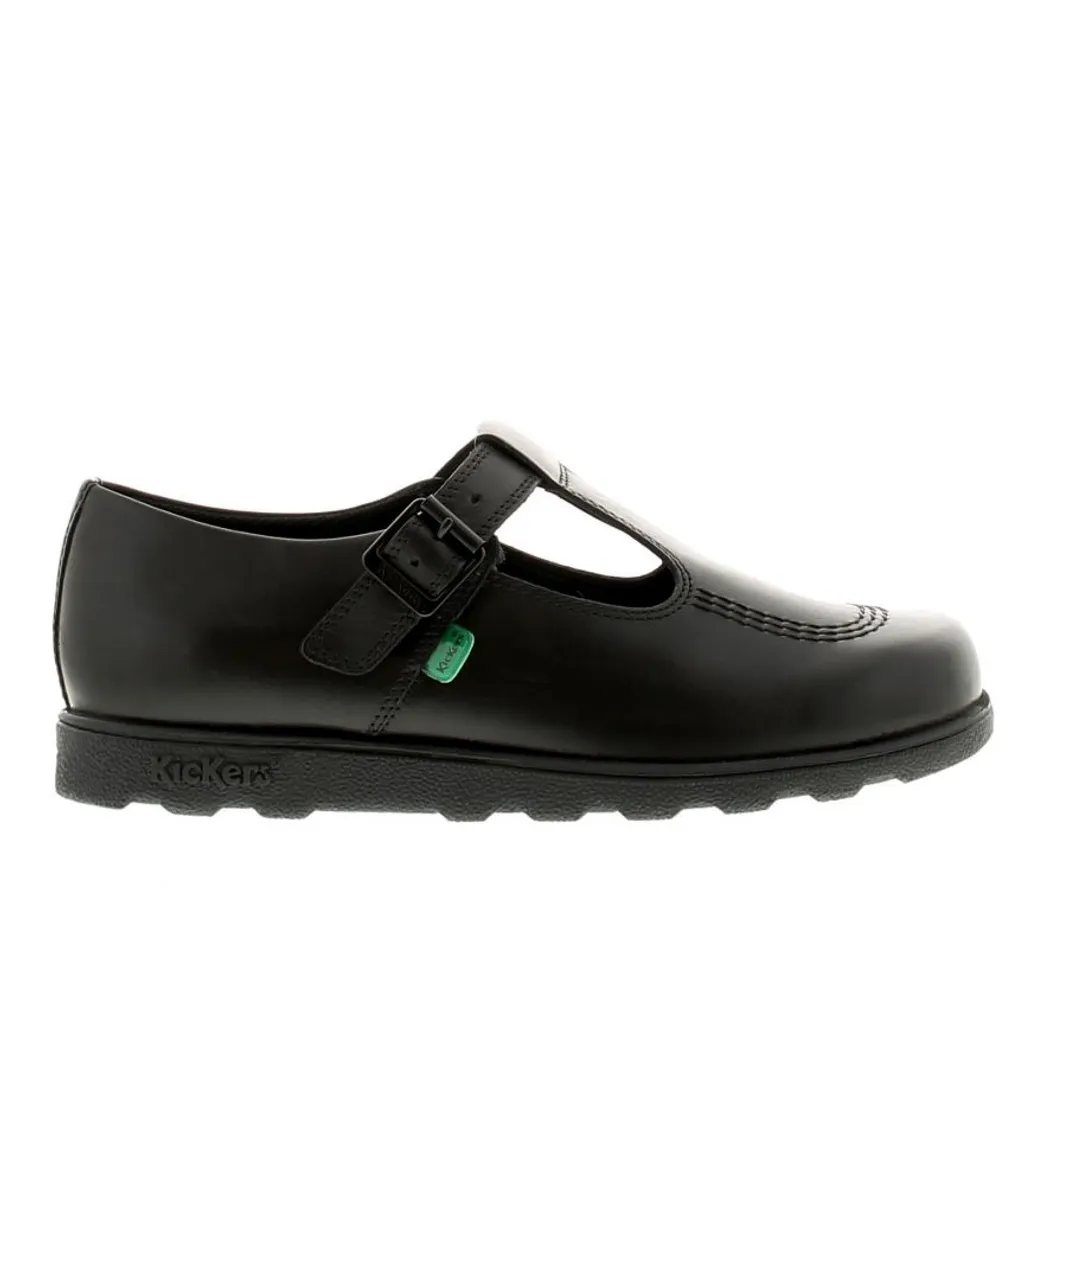 Kickers Womens Shoes Work School Fragma T Buckle Leather black Leather (archived)